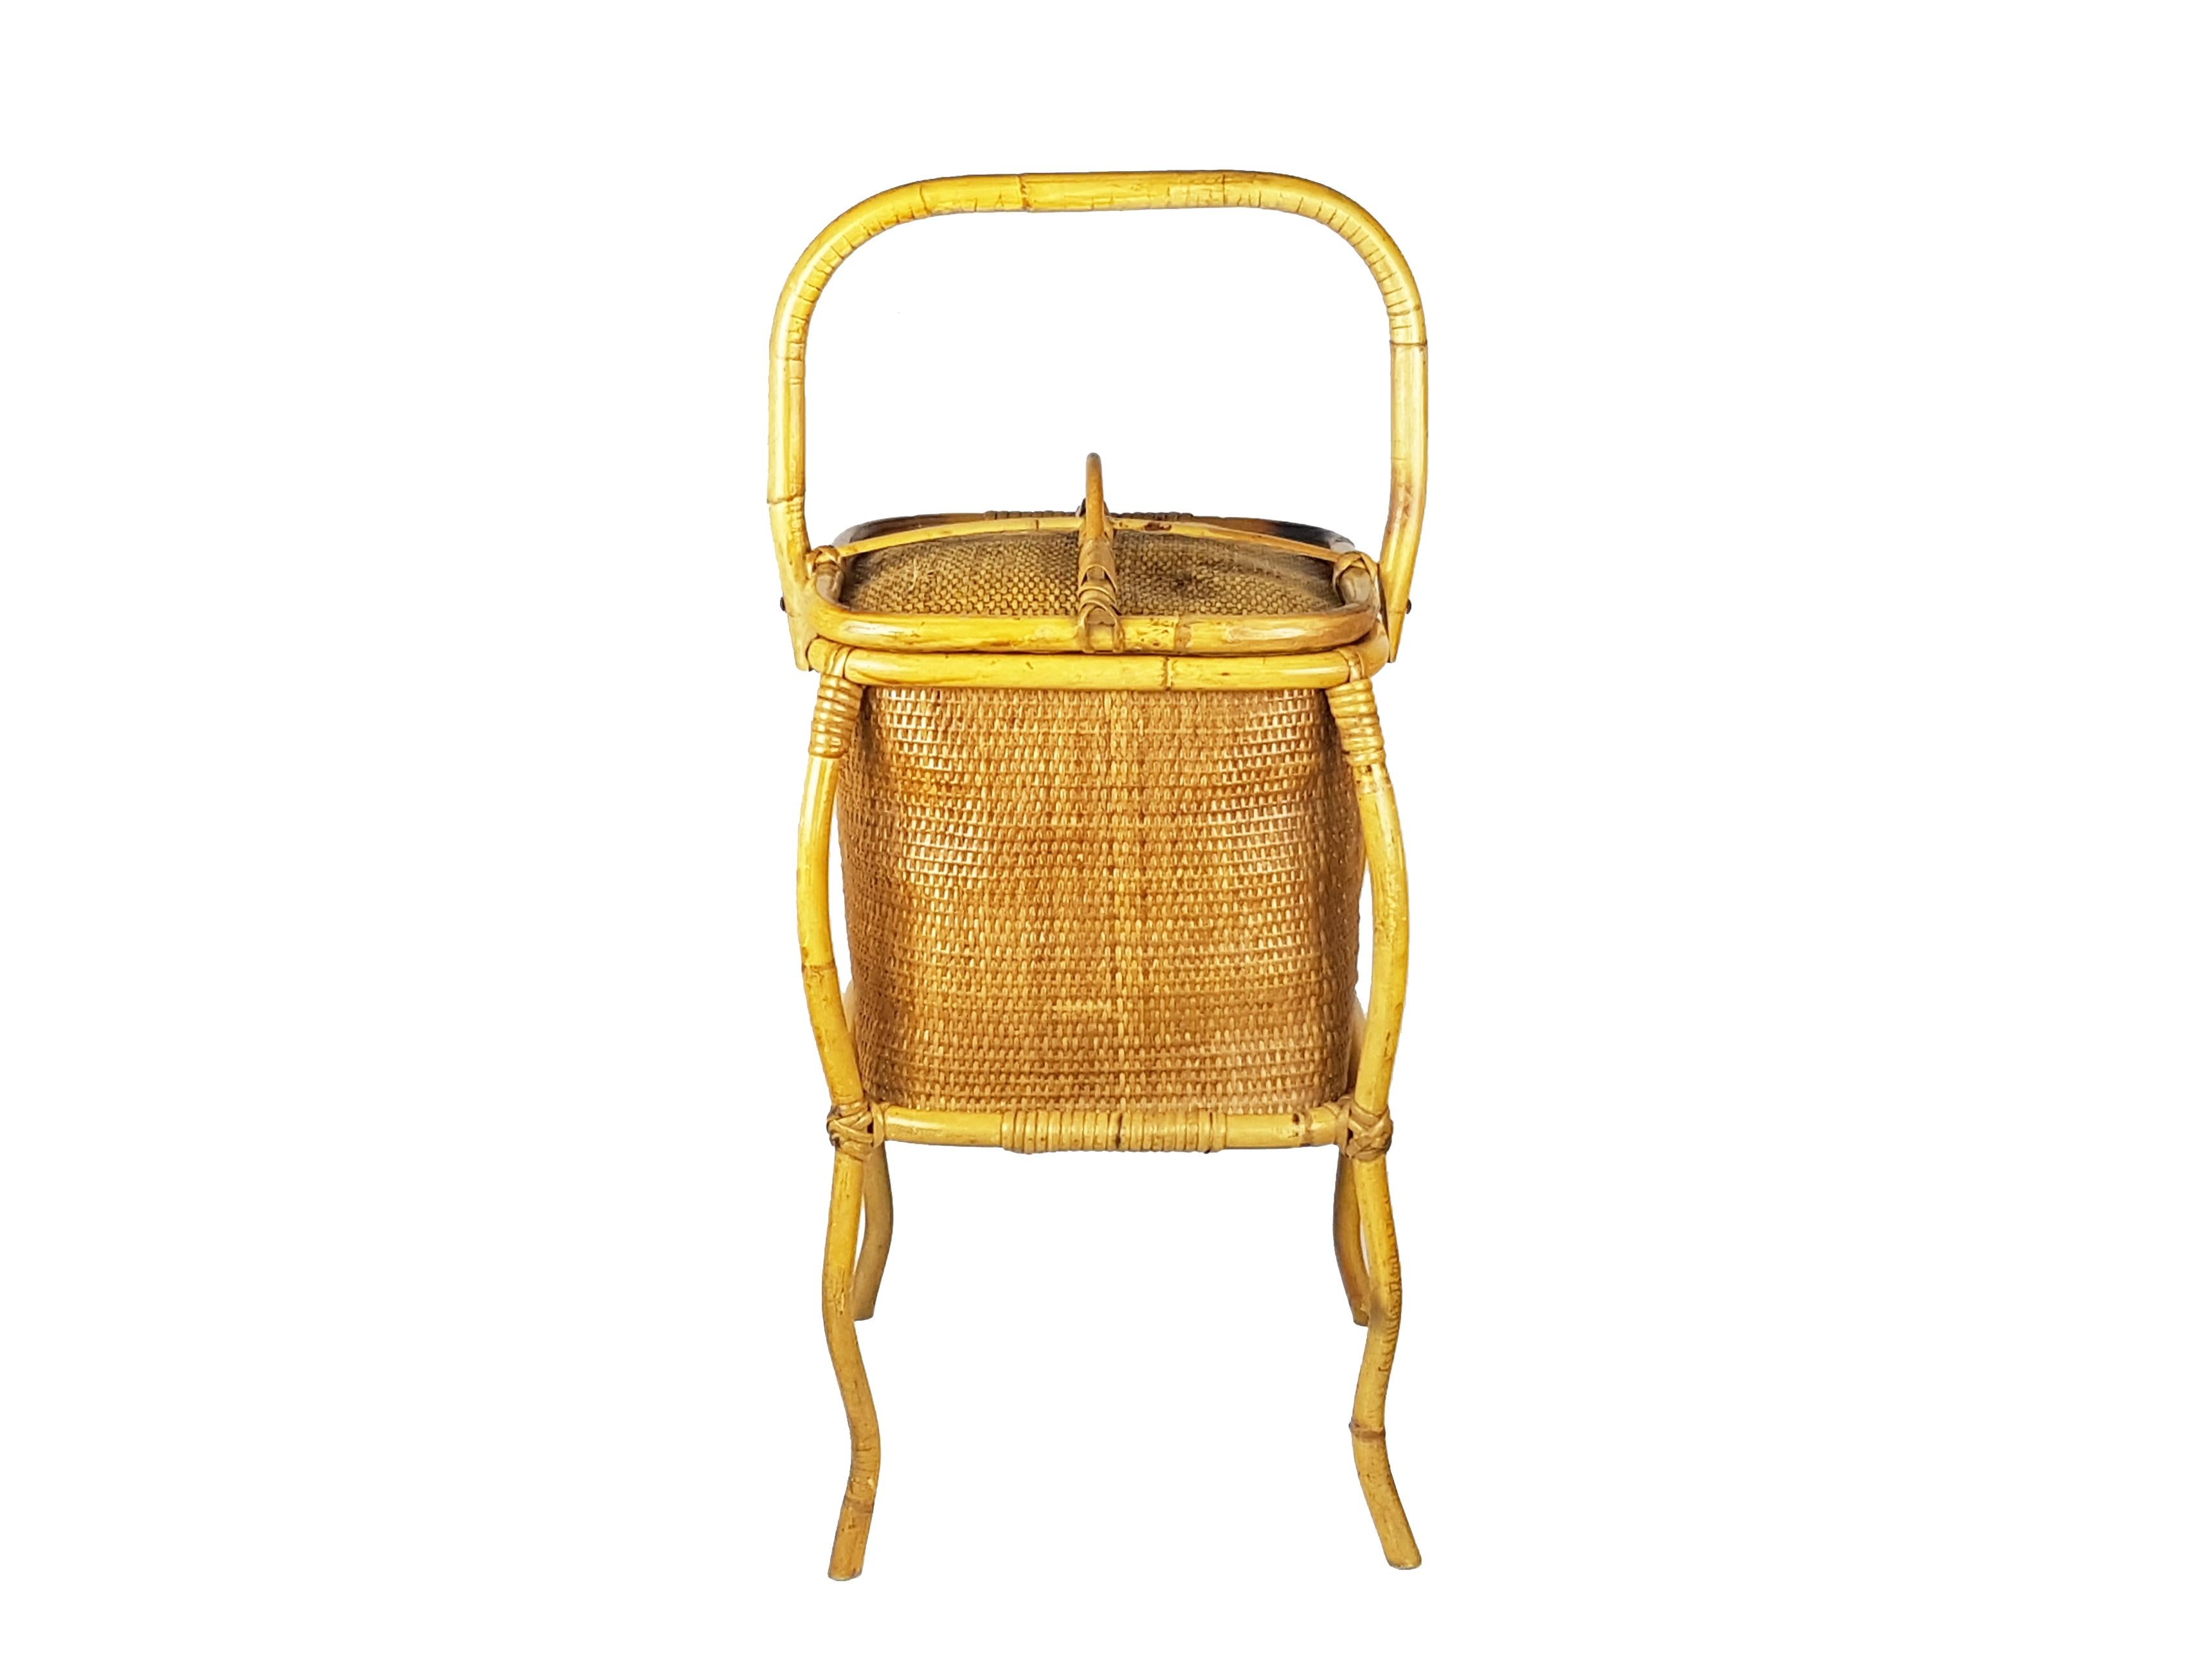 Decorative work basket made of rush and Vienna straw has an elegant and slender shape and a refined workmanship. It can also be used as a magazine rack, towel rack, or other object holder.
Small defect in the lid structure as showed in the